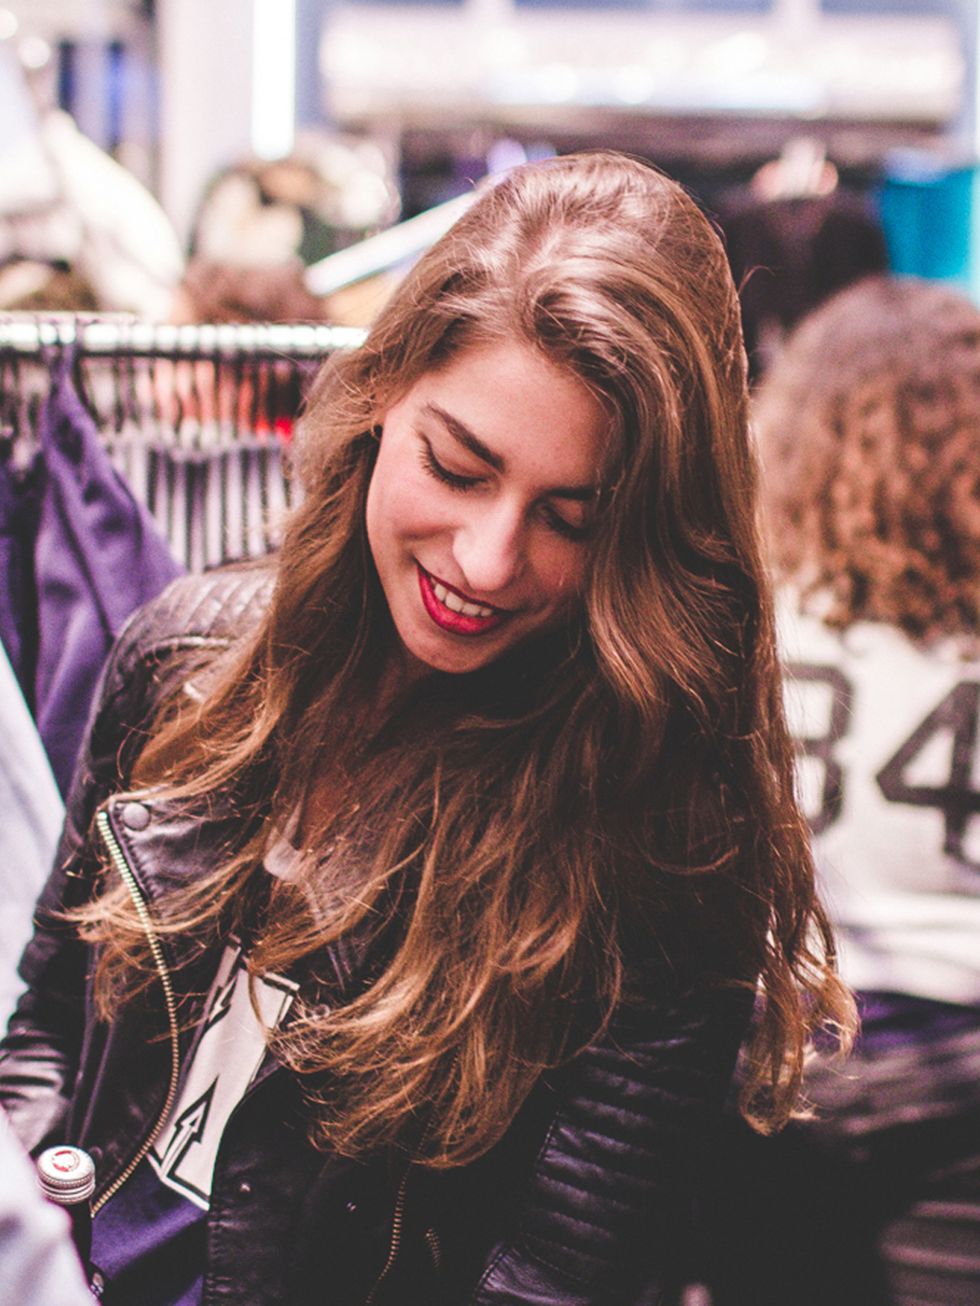 Mouth, Hairstyle, Style, Street fashion, Long hair, Beauty, Fashion, Youth, Brown hair, Feathered hair, 